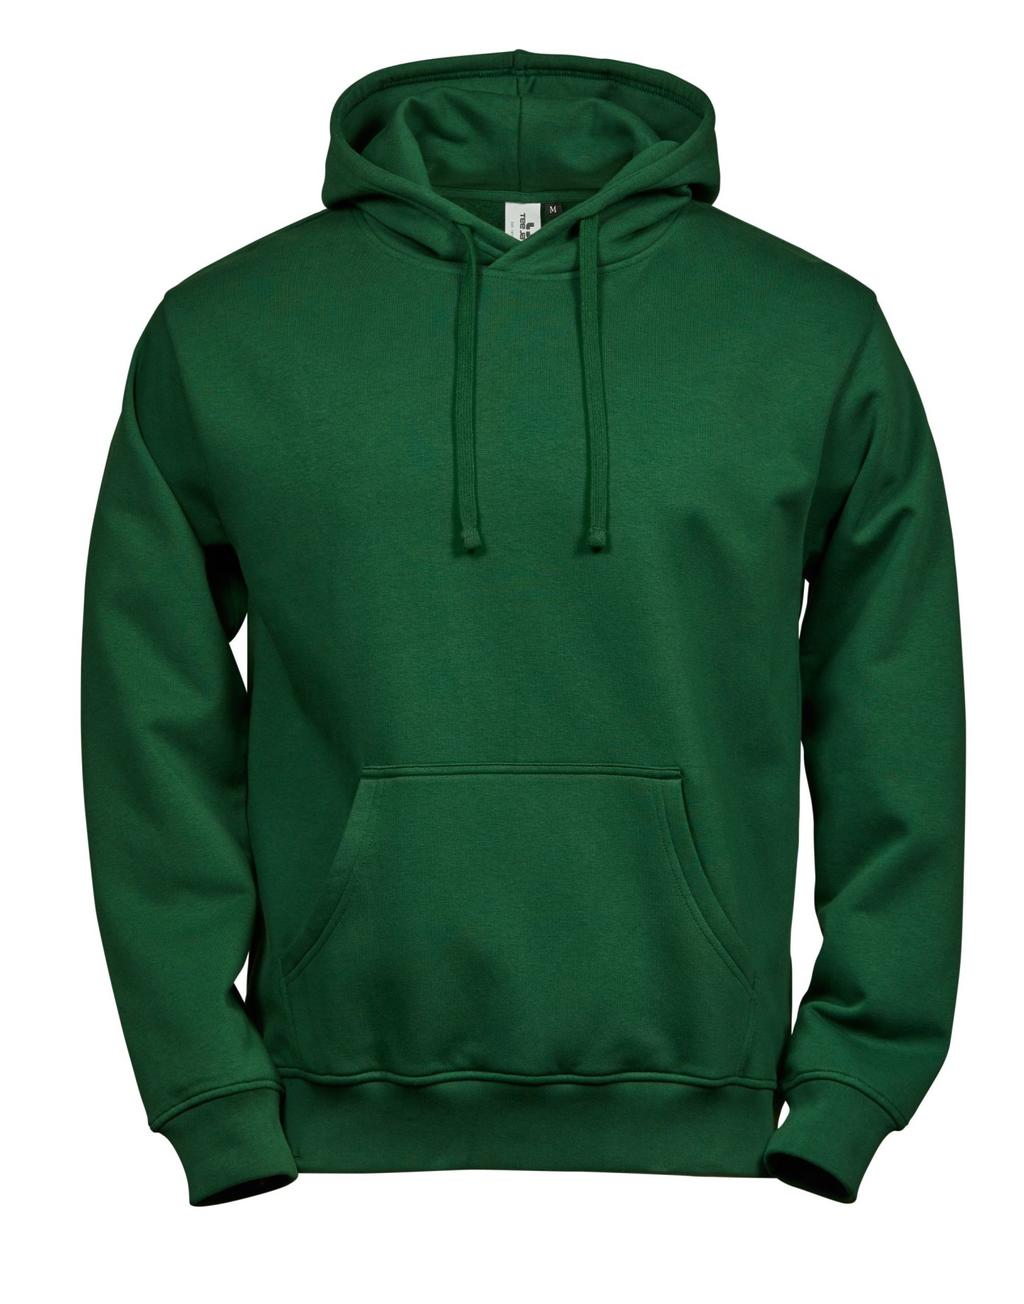 Power Hoodie - forest green